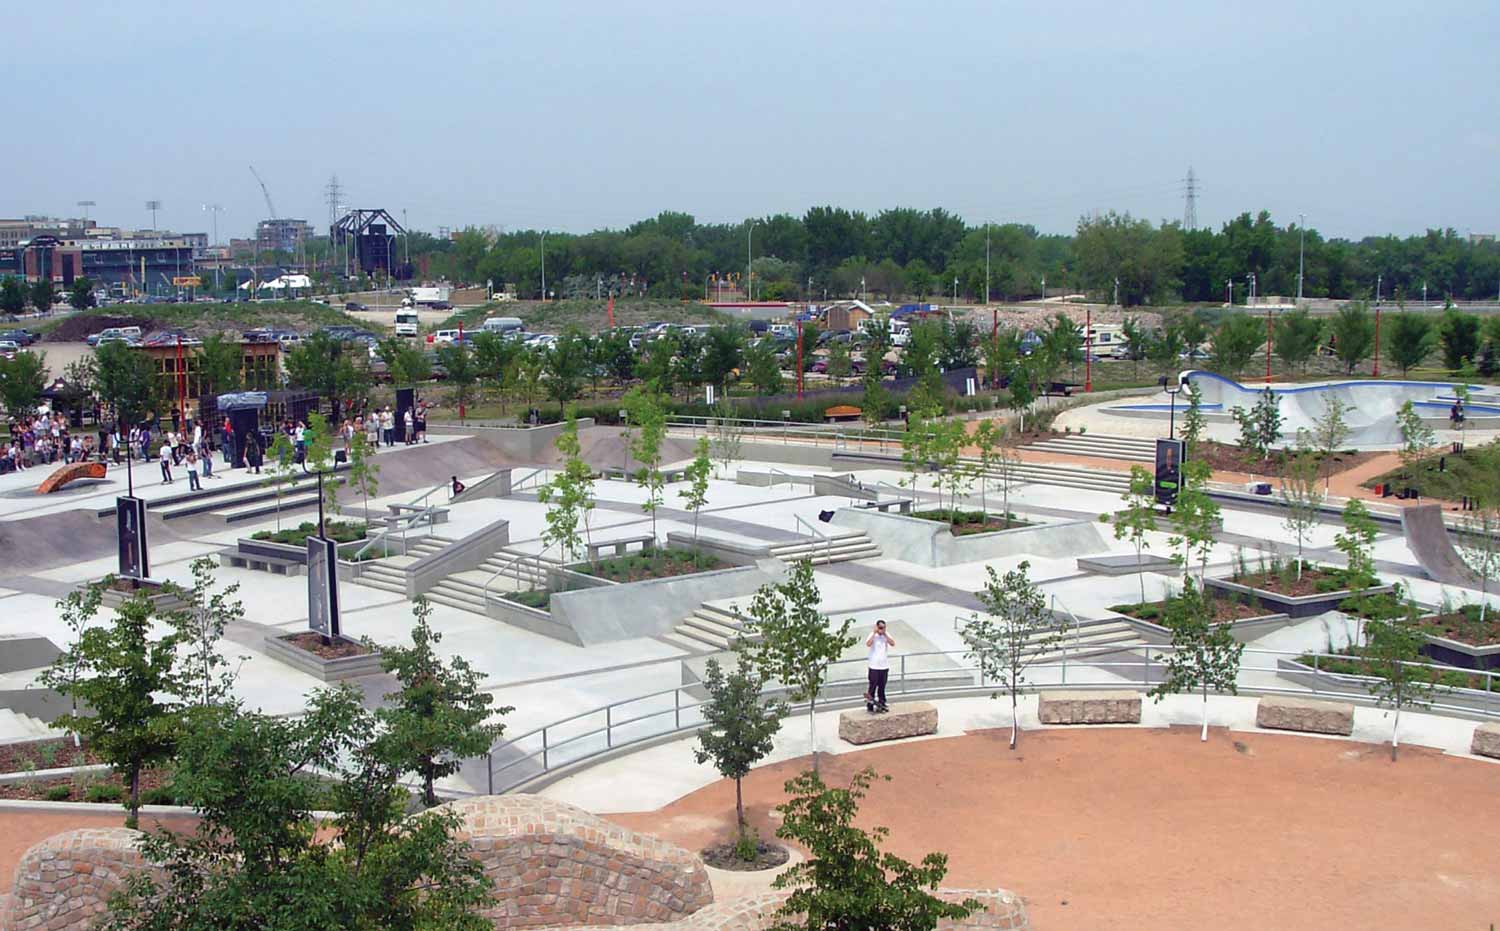 Aerial view of the skate plaza